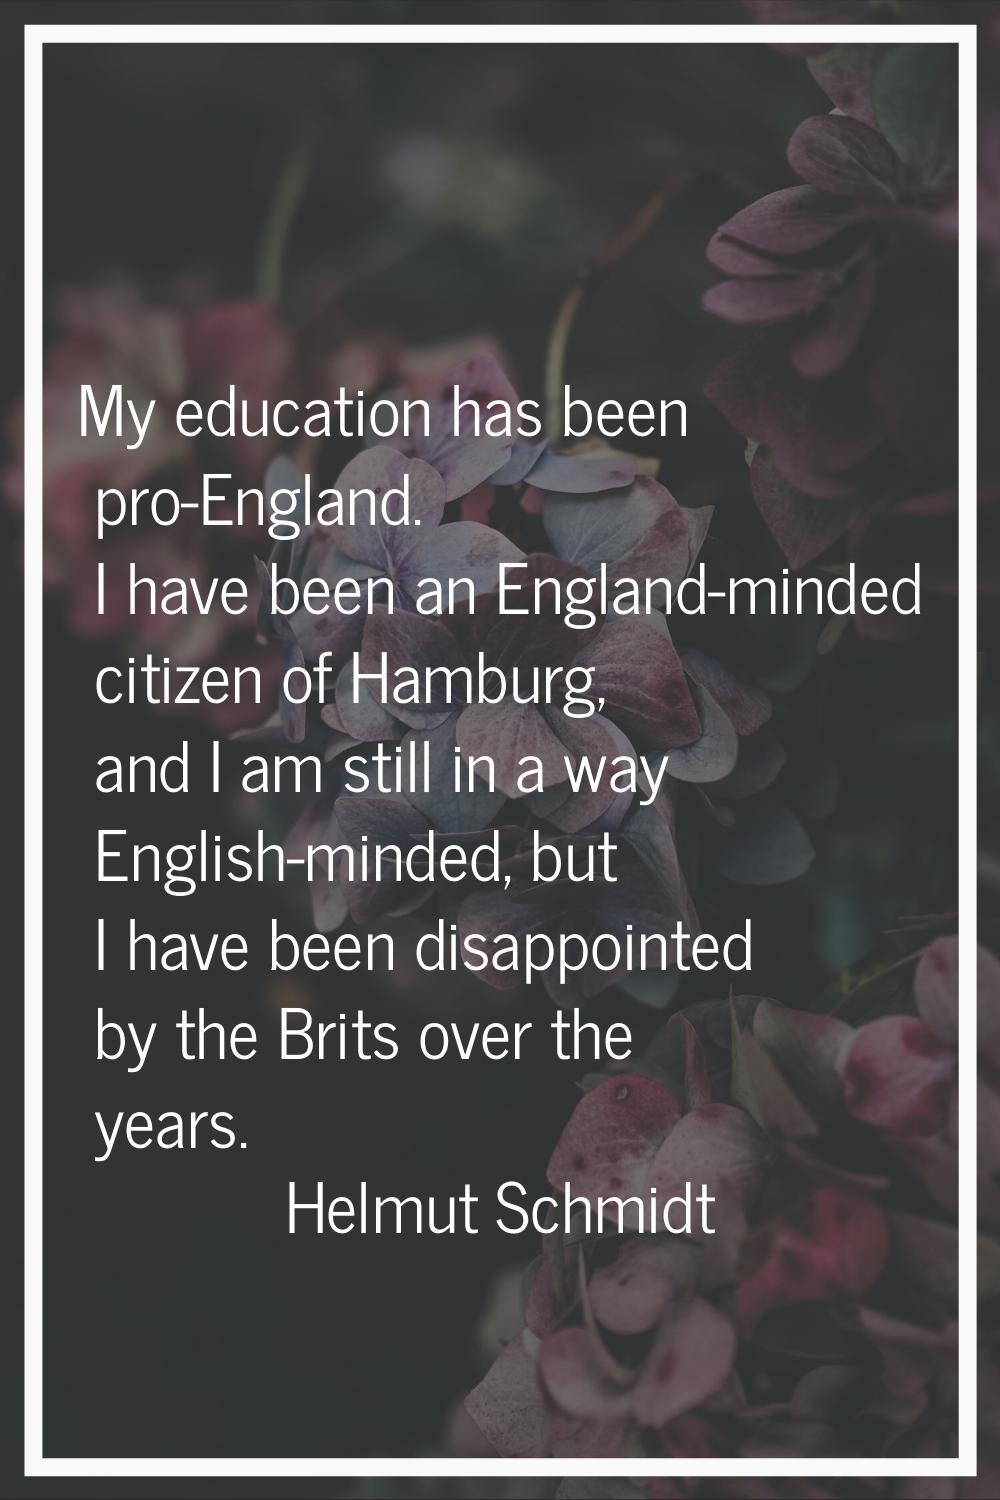 My education has been pro-England. I have been an England-minded citizen of Hamburg, and I am still